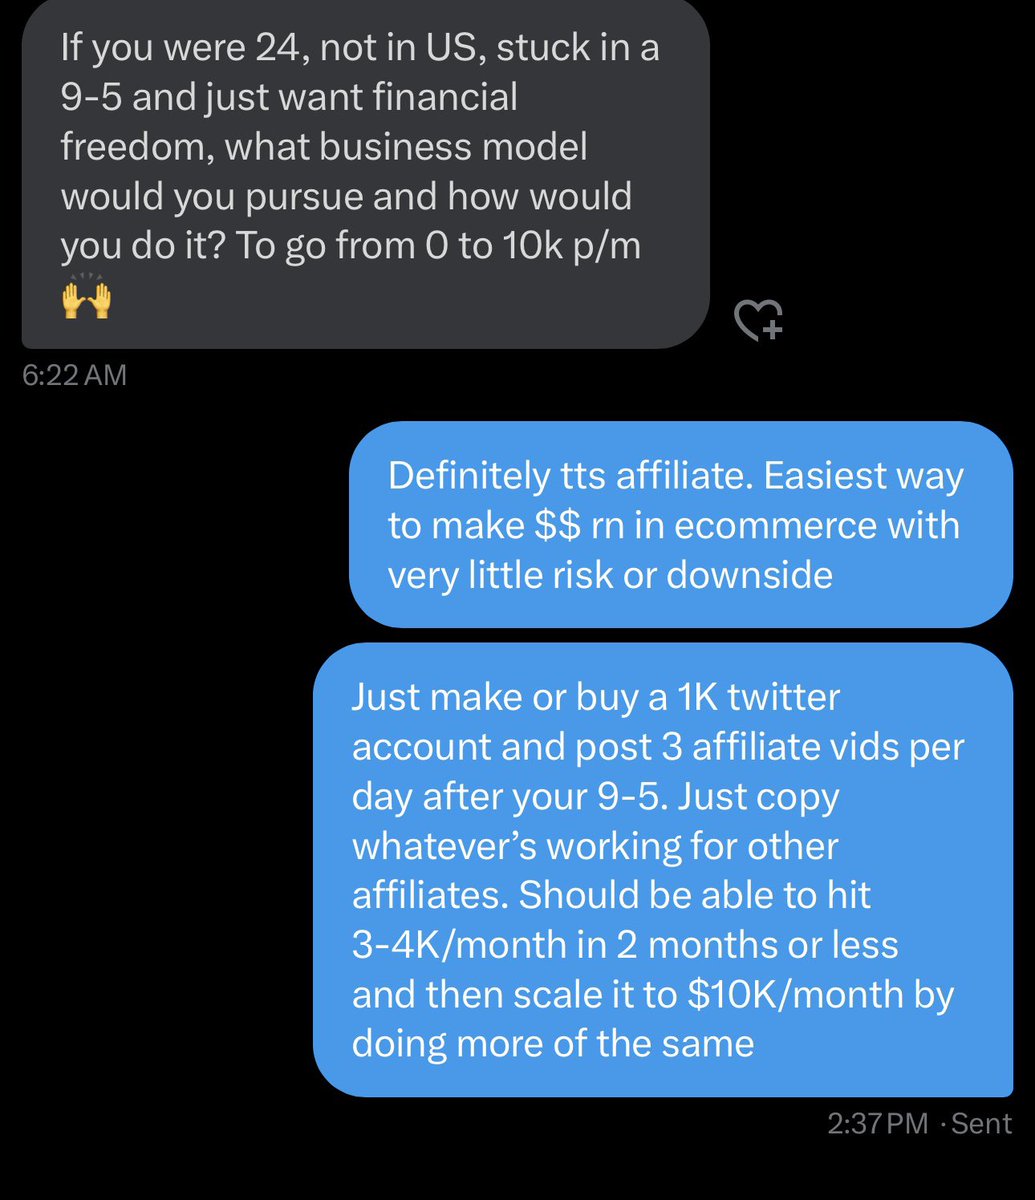 I’d give this advice to my own fam. TikTok Shop affiliate is the way to go if you’re new to eCommerce. Build up some cashflow and some content creation skills and bankroll that into starting a brand or agency.